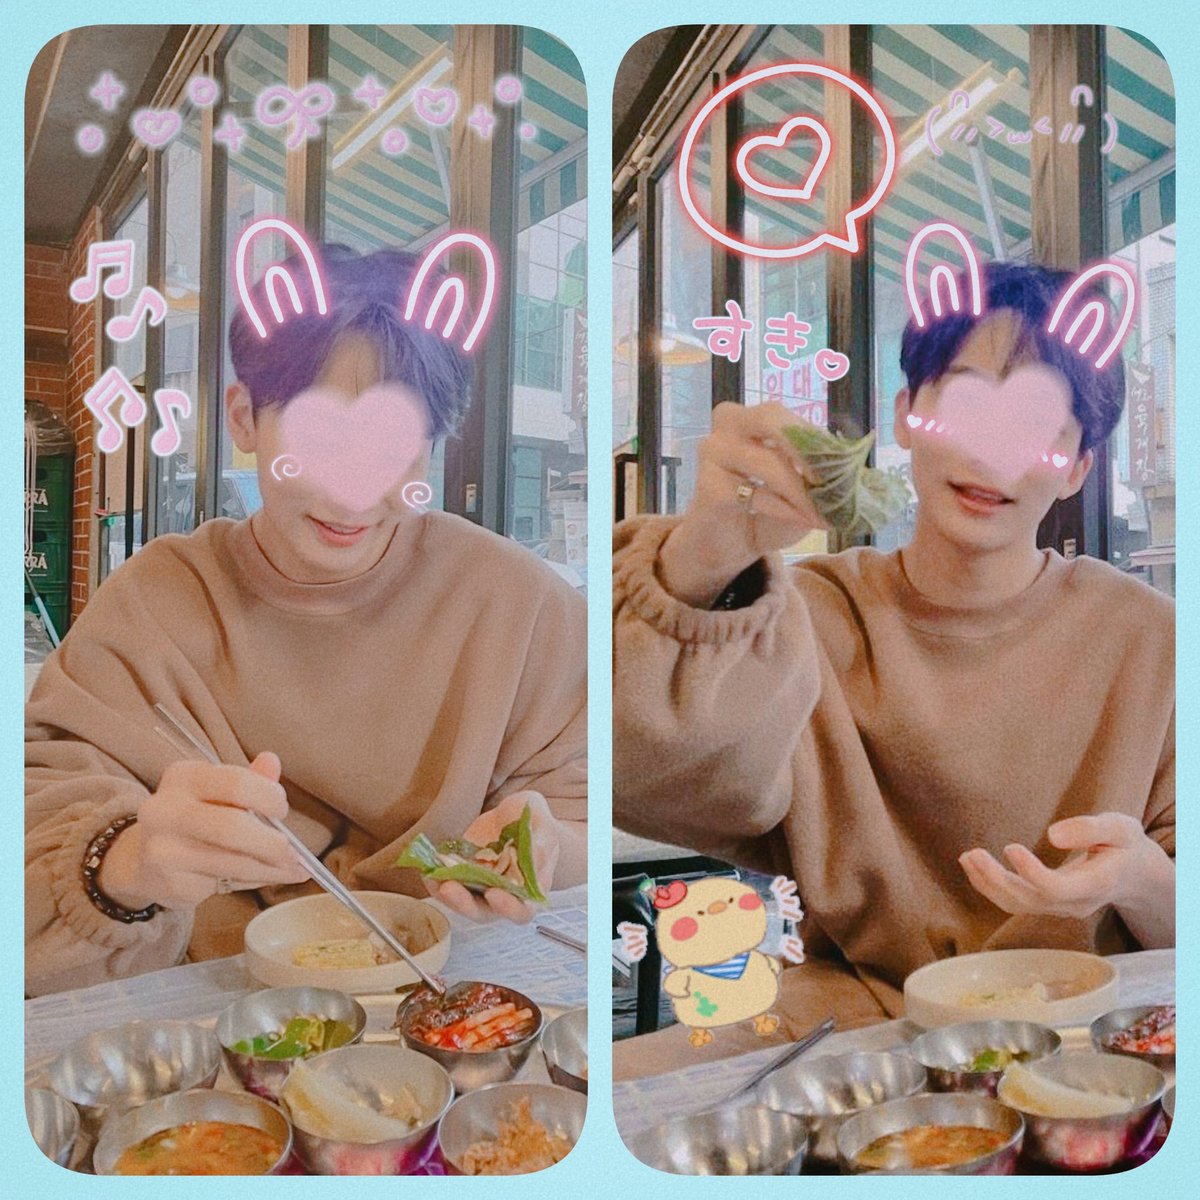 good morning! here are pictures from yesterday 😋 so... i may or may not have accidentally run into thomas lul..... so im distracting him with food!!!! 
( • ᴗ - ) ✧
おはよう～ 昨日の写真だ！😋 偶然トウに出くわしたから、彼に食べ物で気を紛らわせたいんだ... 笑